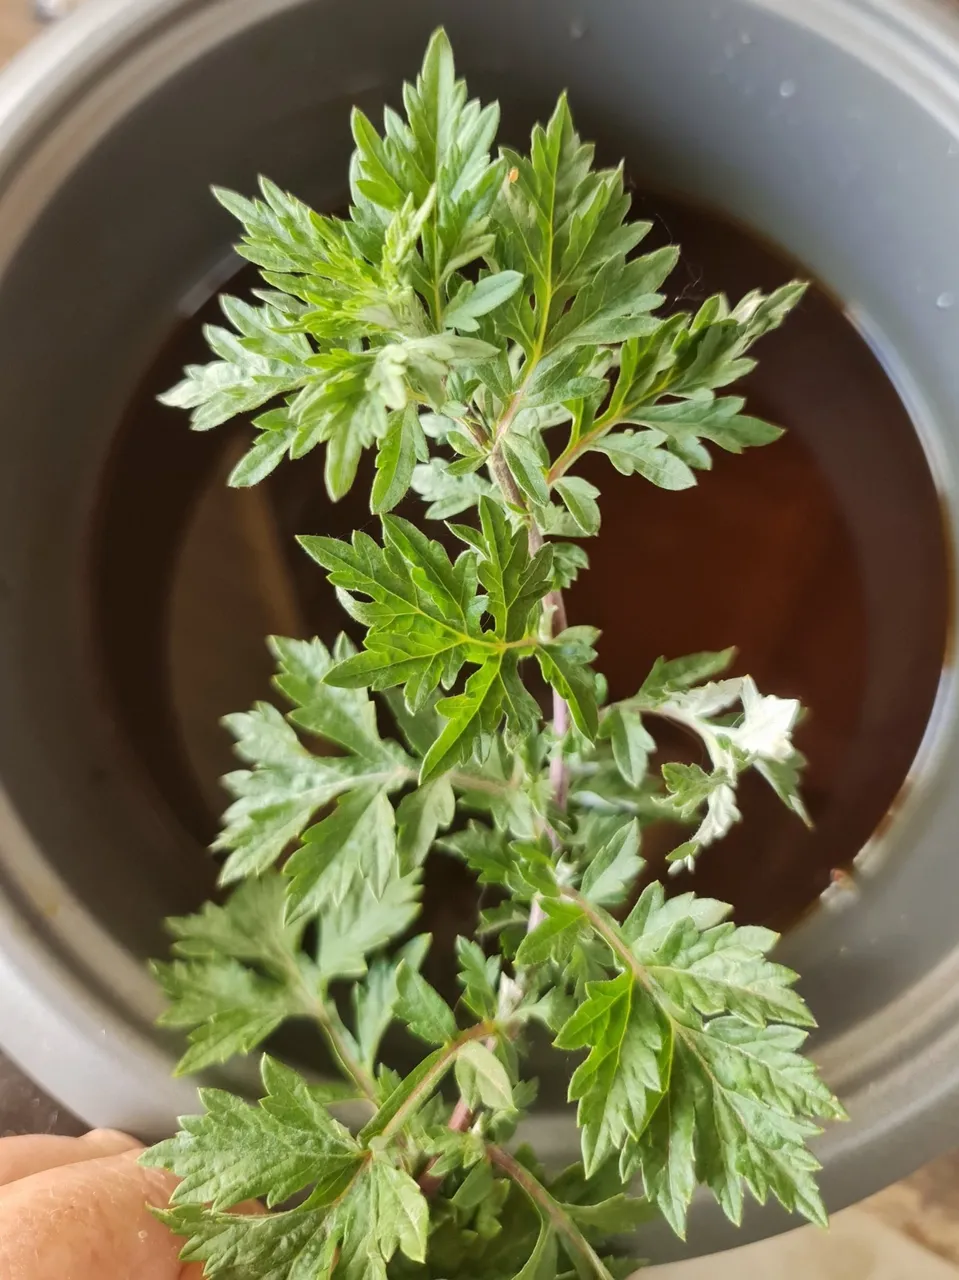 Adding mugwort to your oils helps penetration